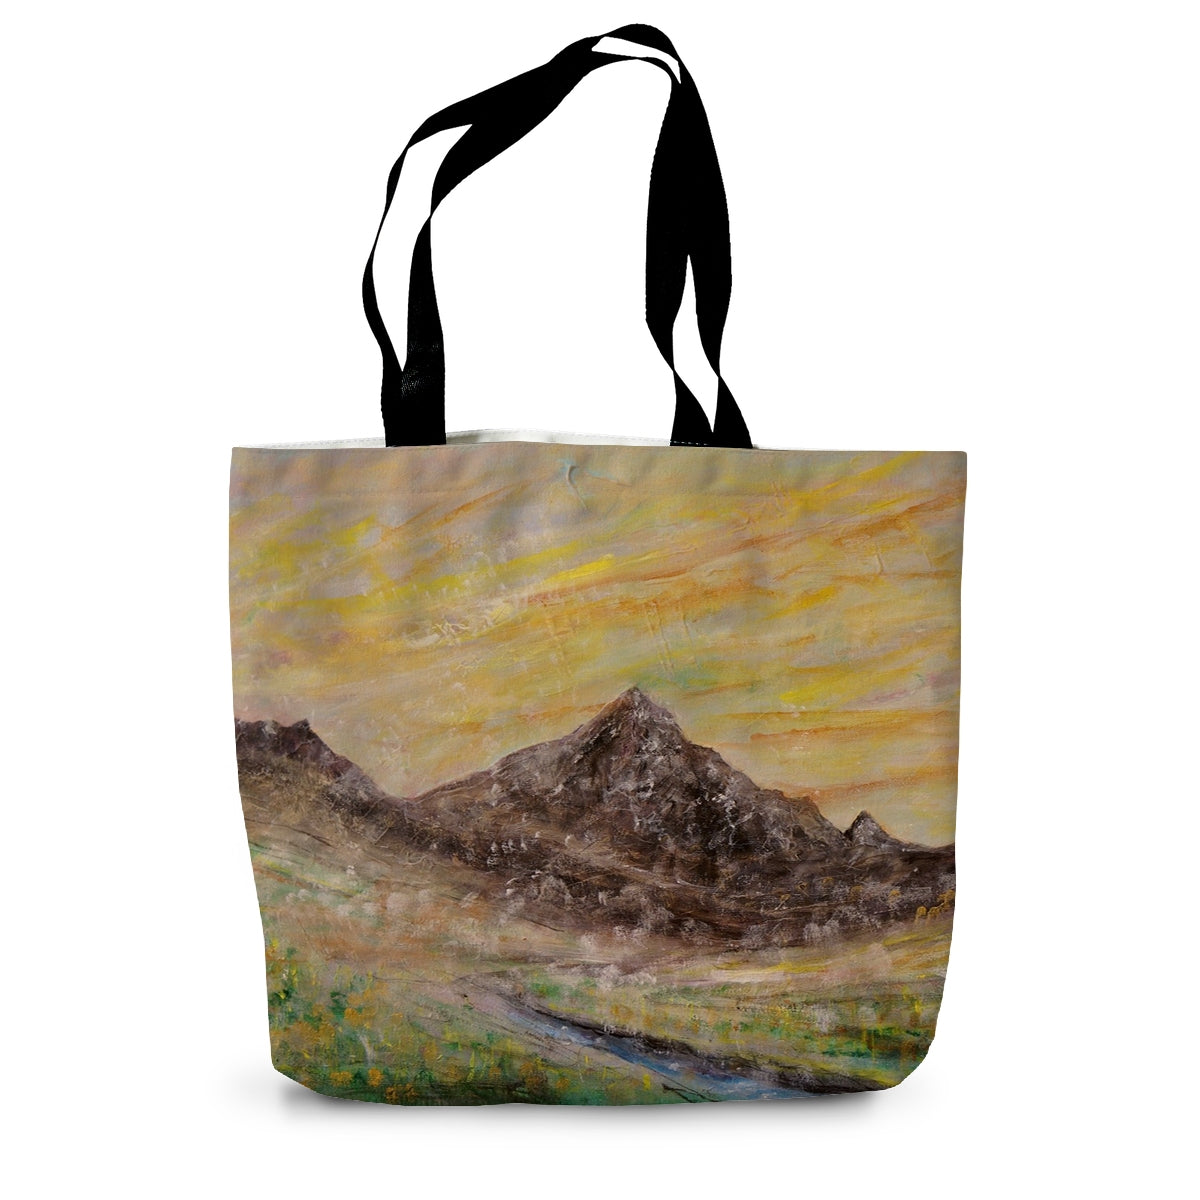 Glen Rosa Mist Arran Art Gifts Canvas Tote Bag-Bags-Arran Art Gallery-14"x18.5"-Paintings, Prints, Homeware, Art Gifts From Scotland By Scottish Artist Kevin Hunter